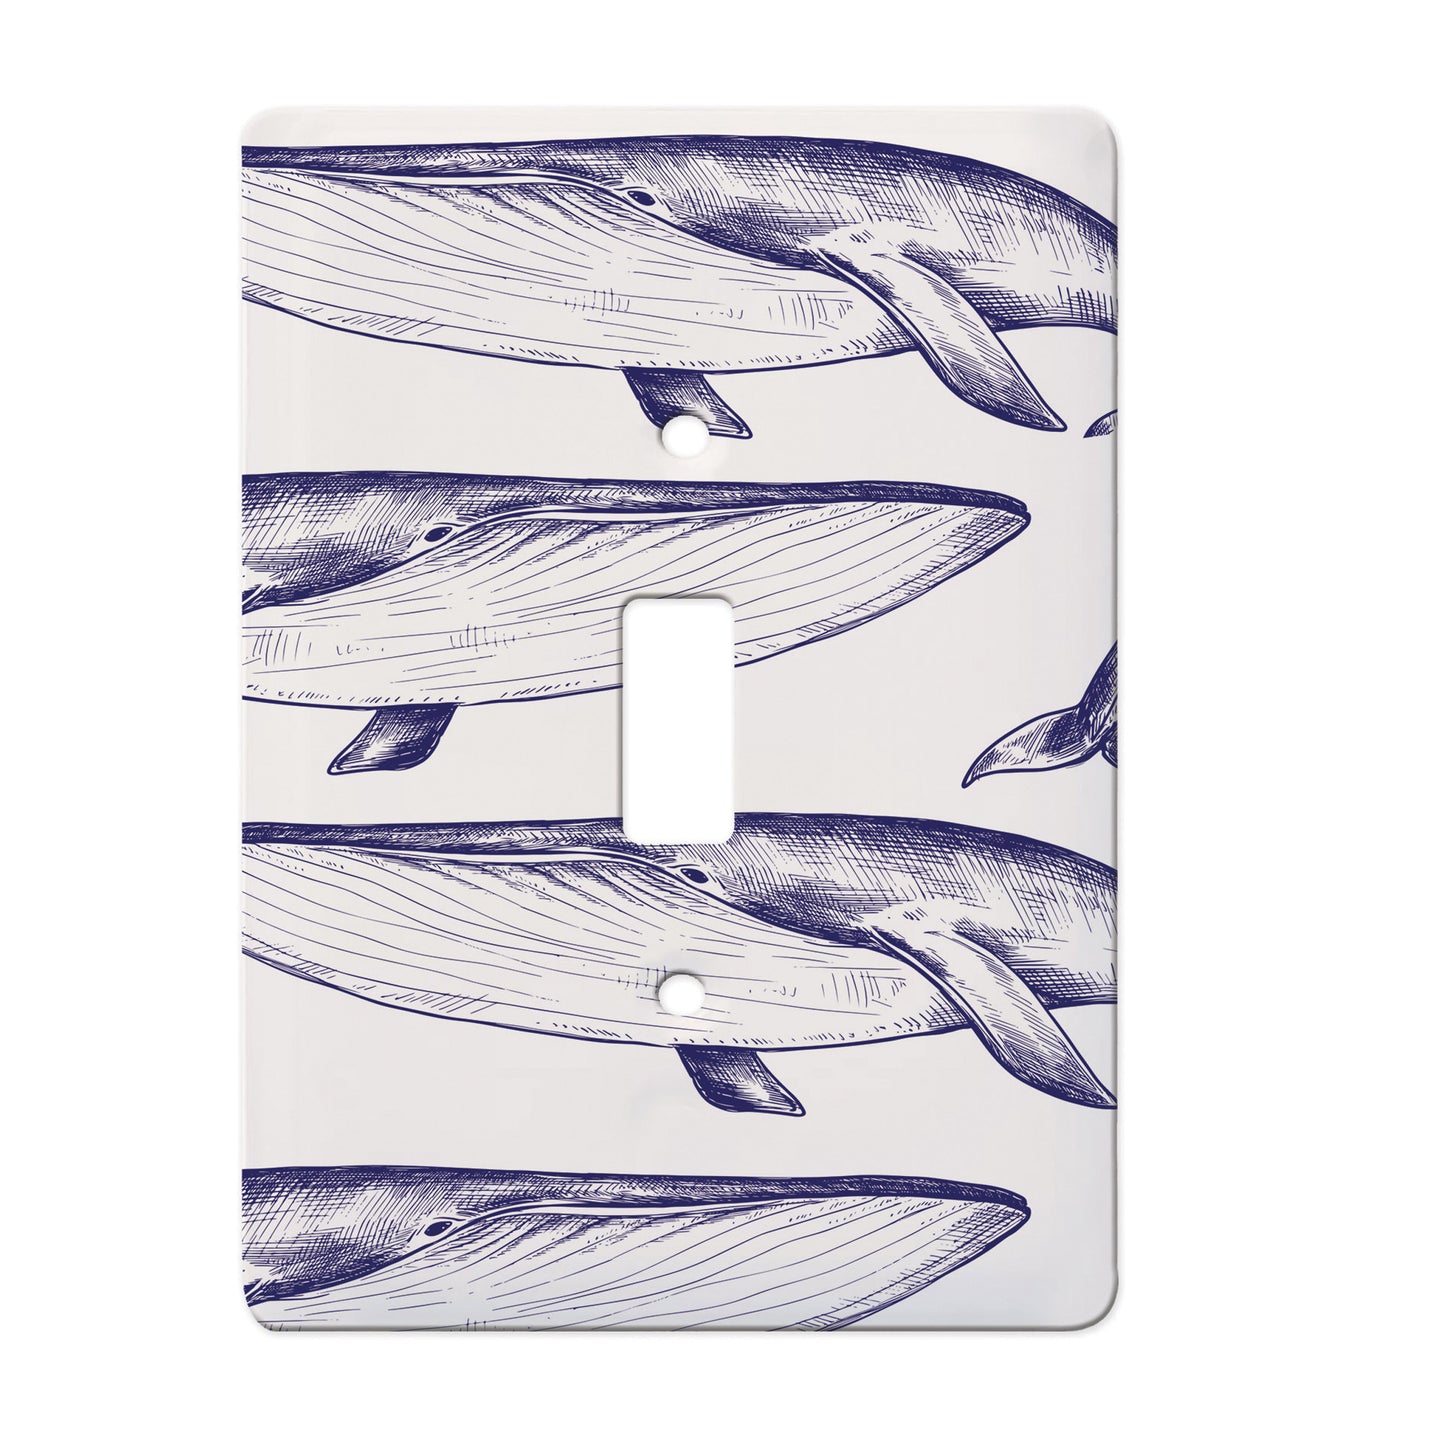 white ceramic single toggle switch plate featuring alternating pattern of navy whales.